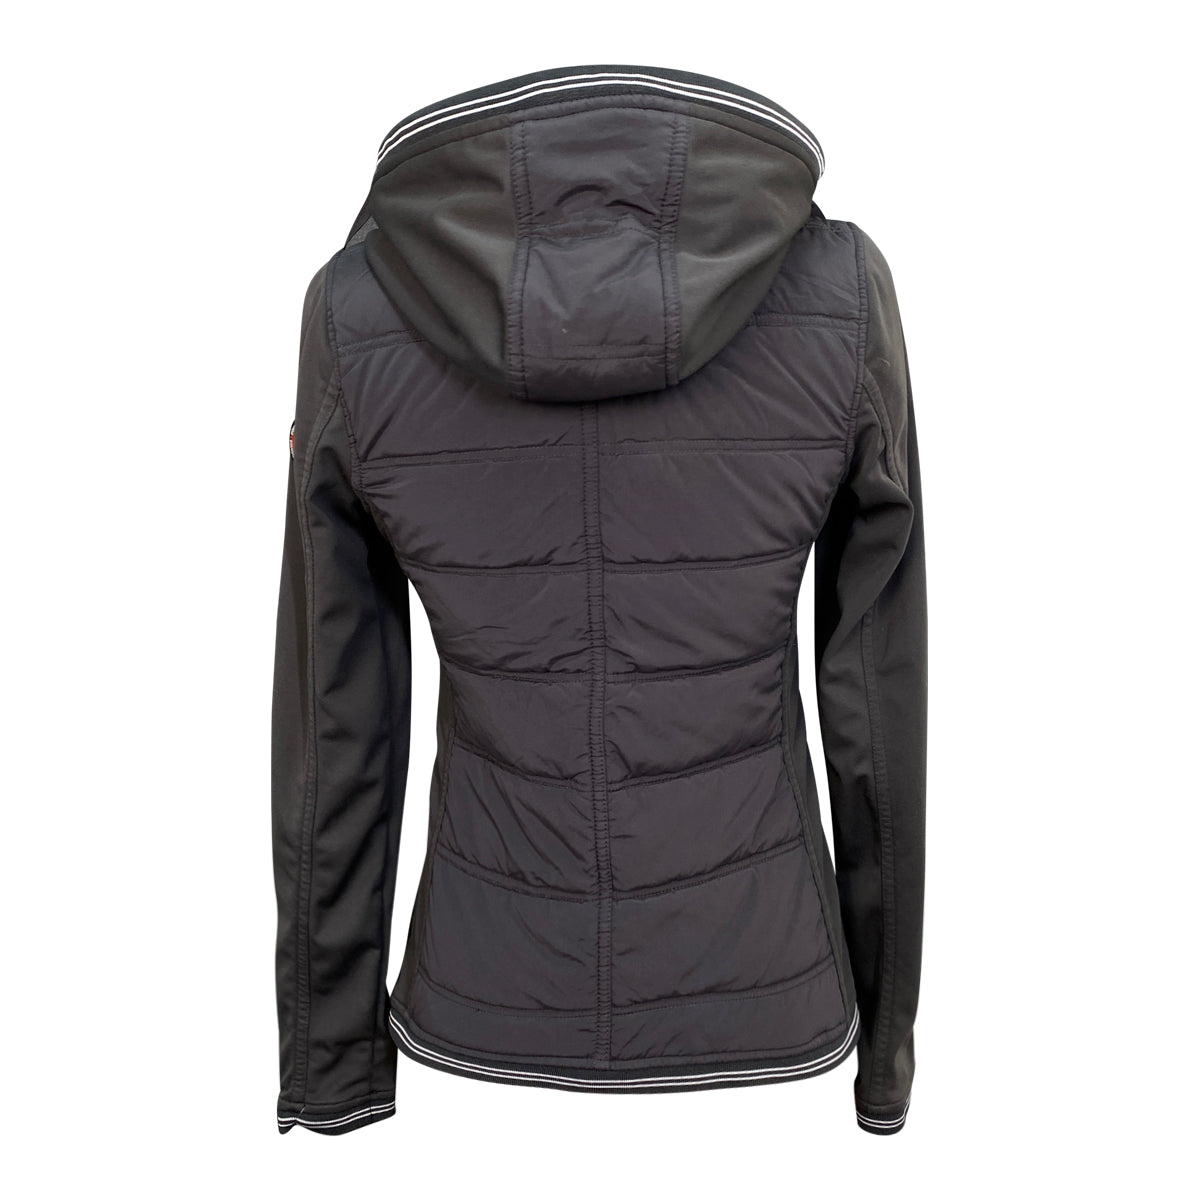 Schockemohle "Sarah Style" Quilted Jacket in Grey